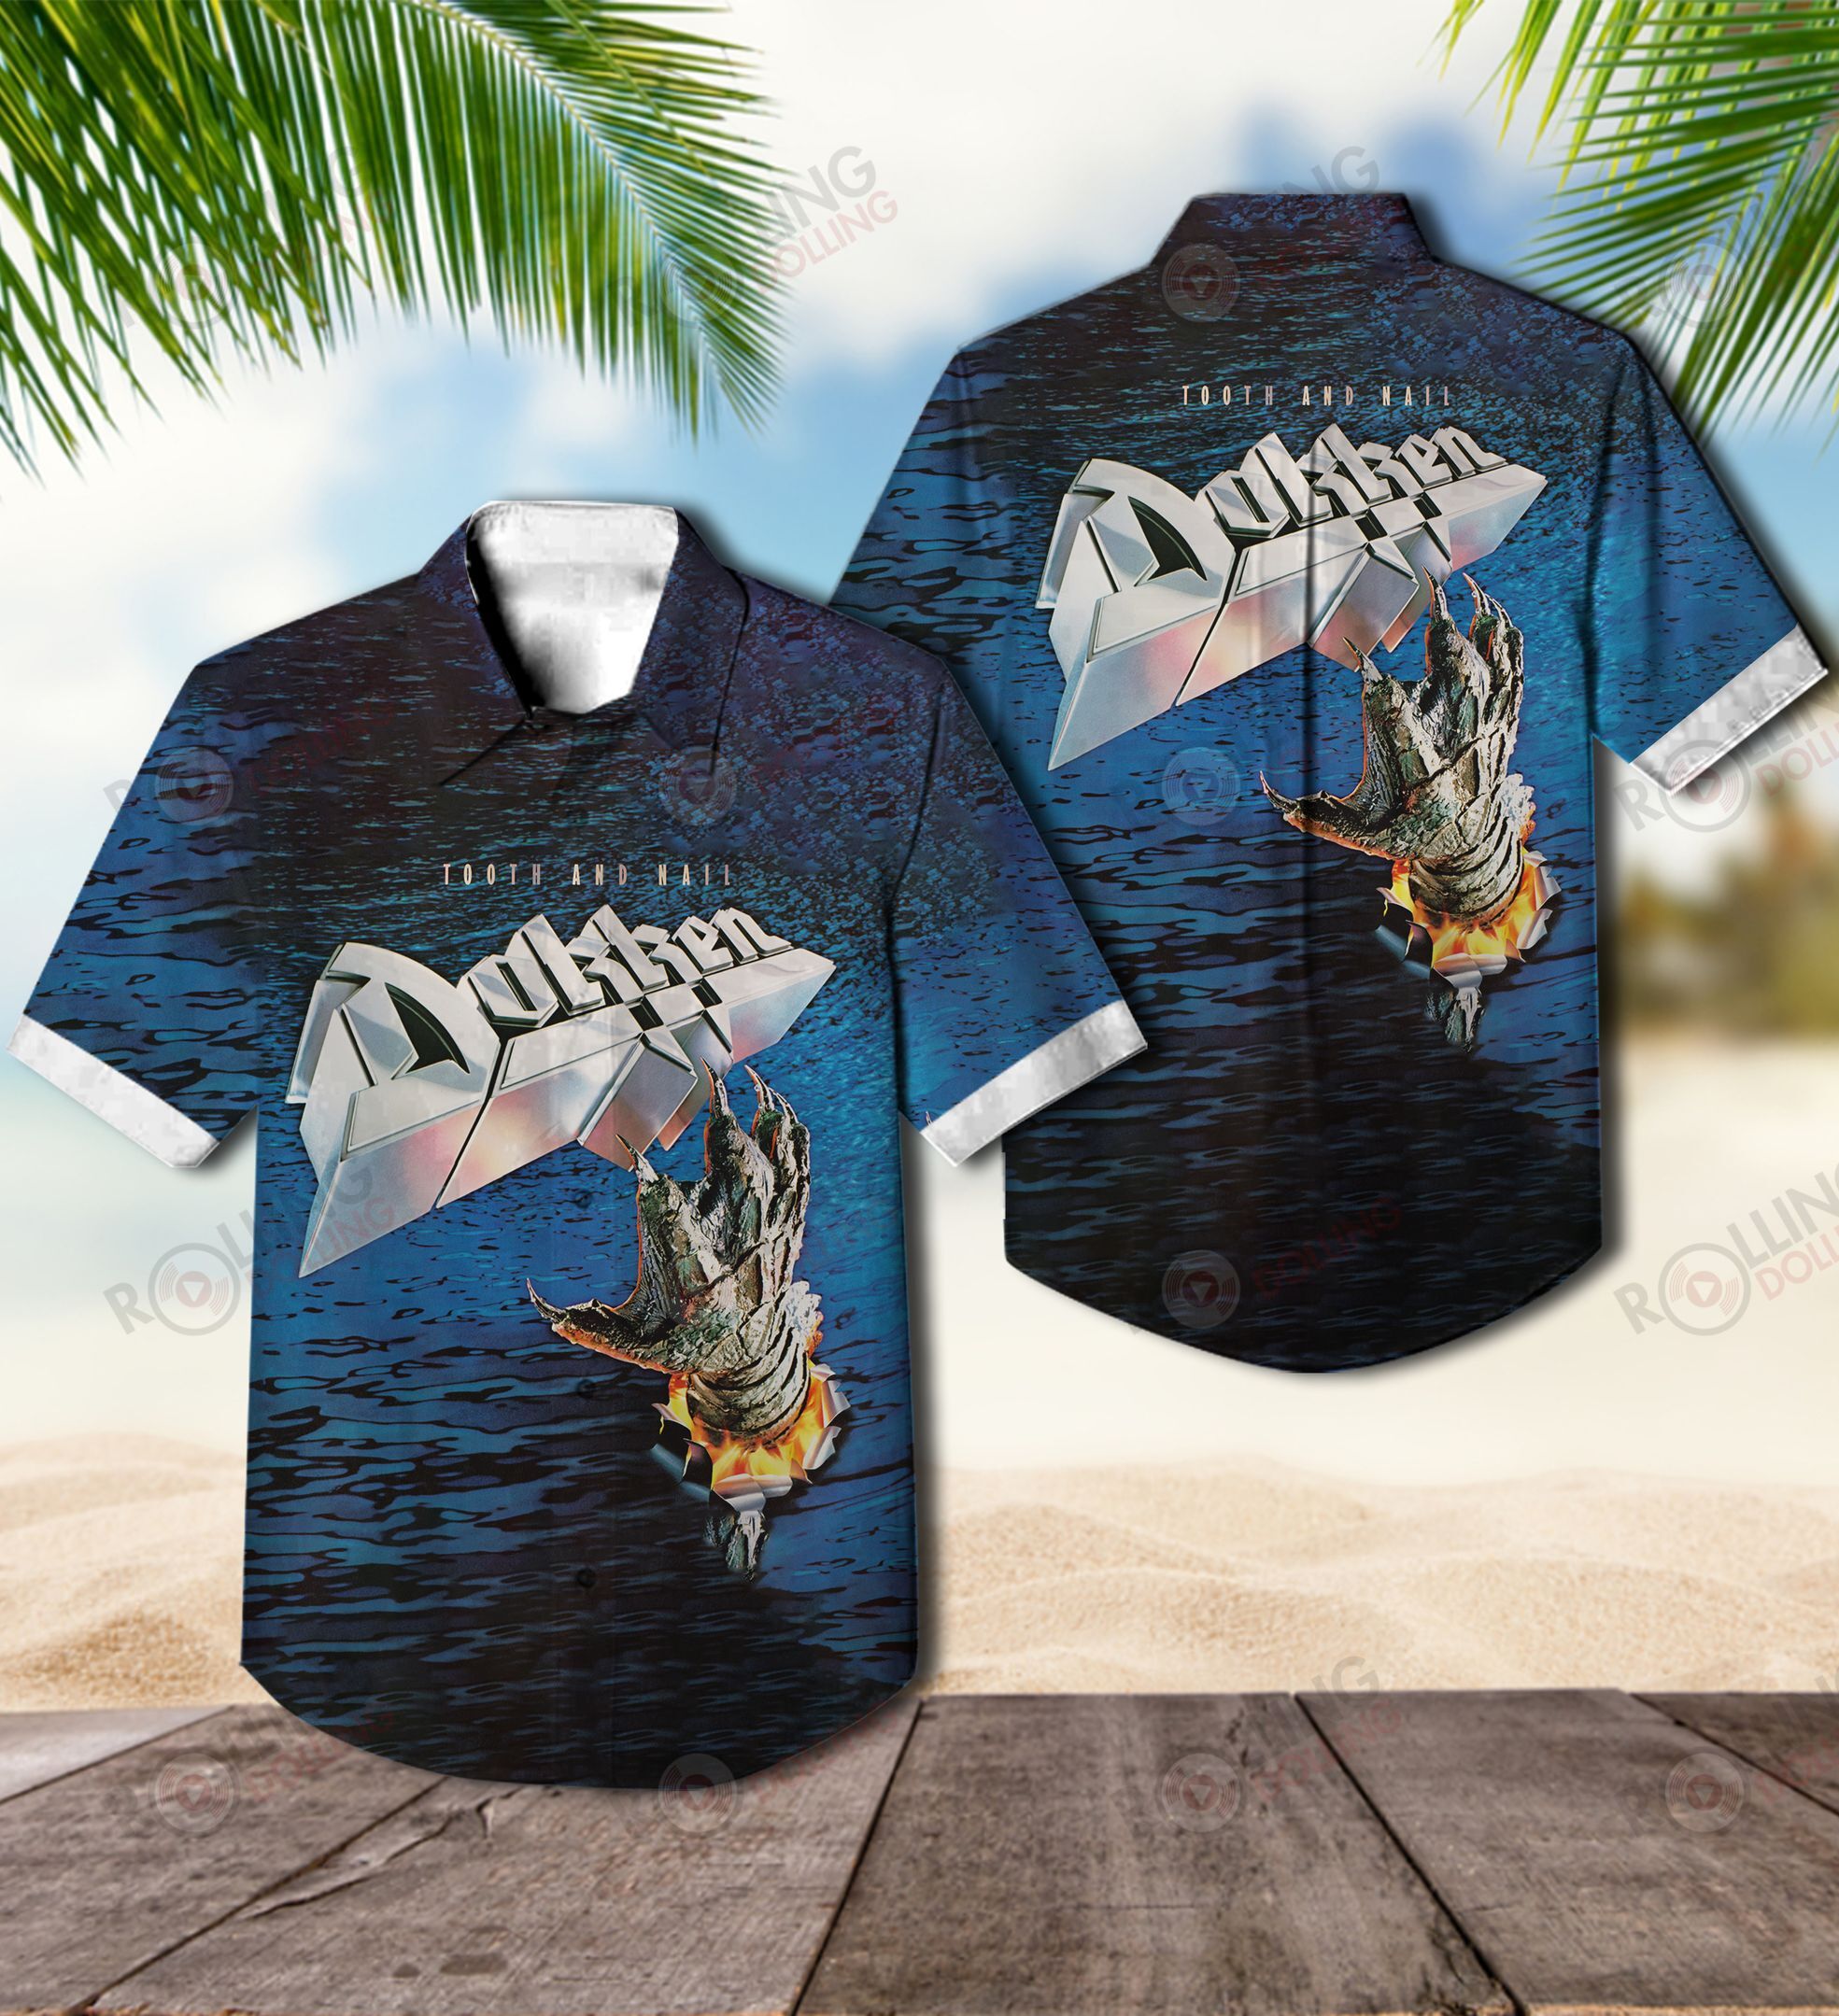 The Hawaiian Shirt is a popular shirt that is worn by Rock band fans 15